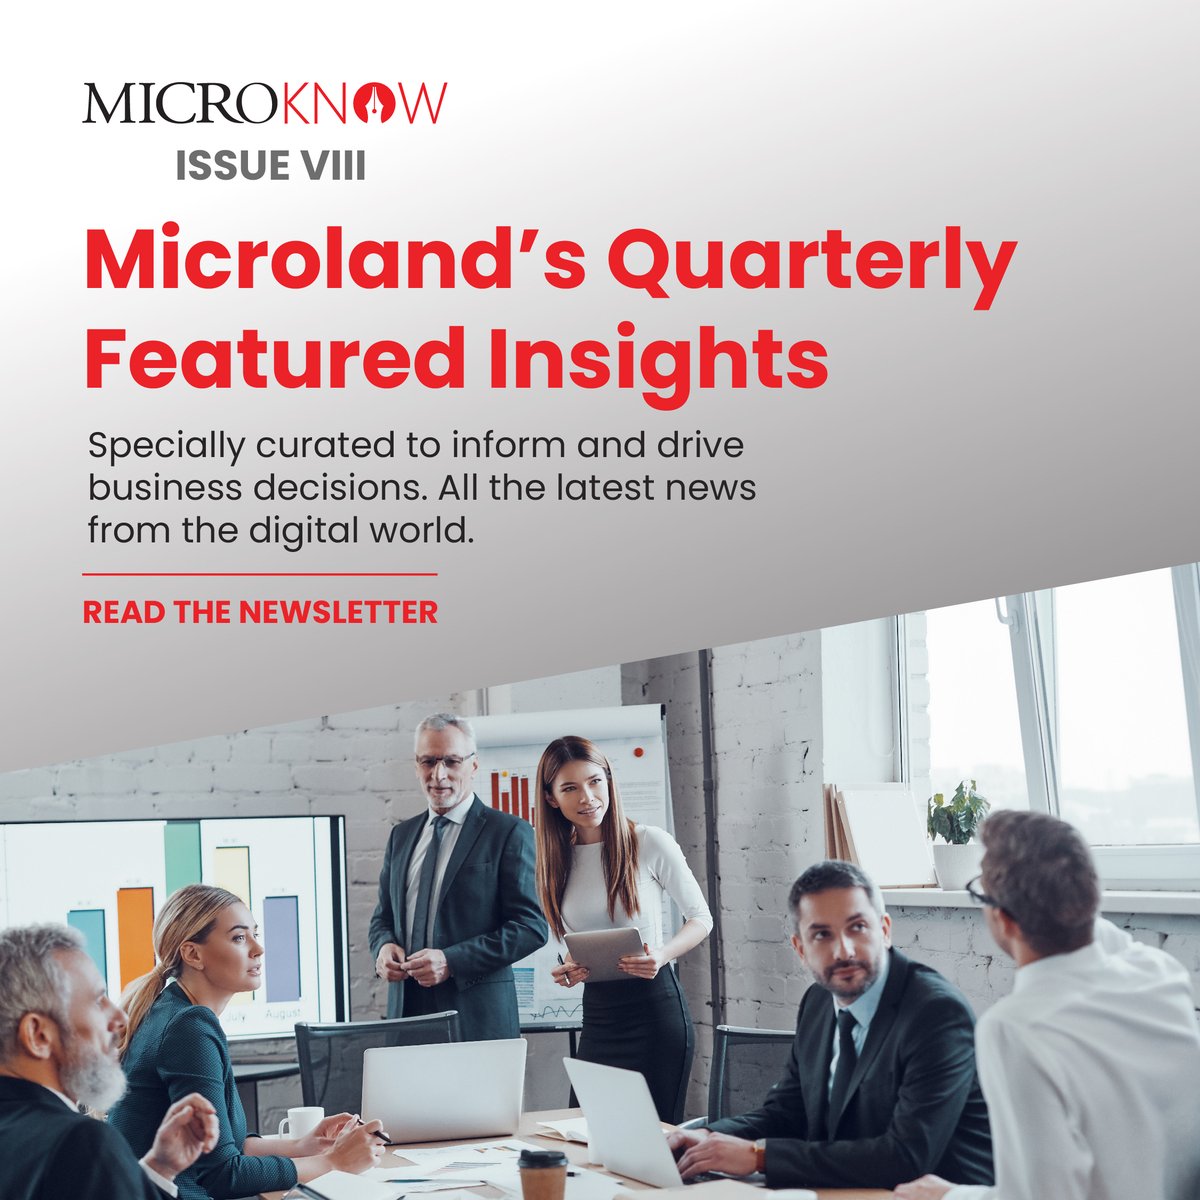 A world of developments from the last quarter - from recognitions to events, articles written by Chief Microlander Pradeep Kar and blogs covering a wide array of trending topics. All in the 8th edition of the #MicroKnow newsletter. Read now. lnkd.in/gSydgYDG #Microland